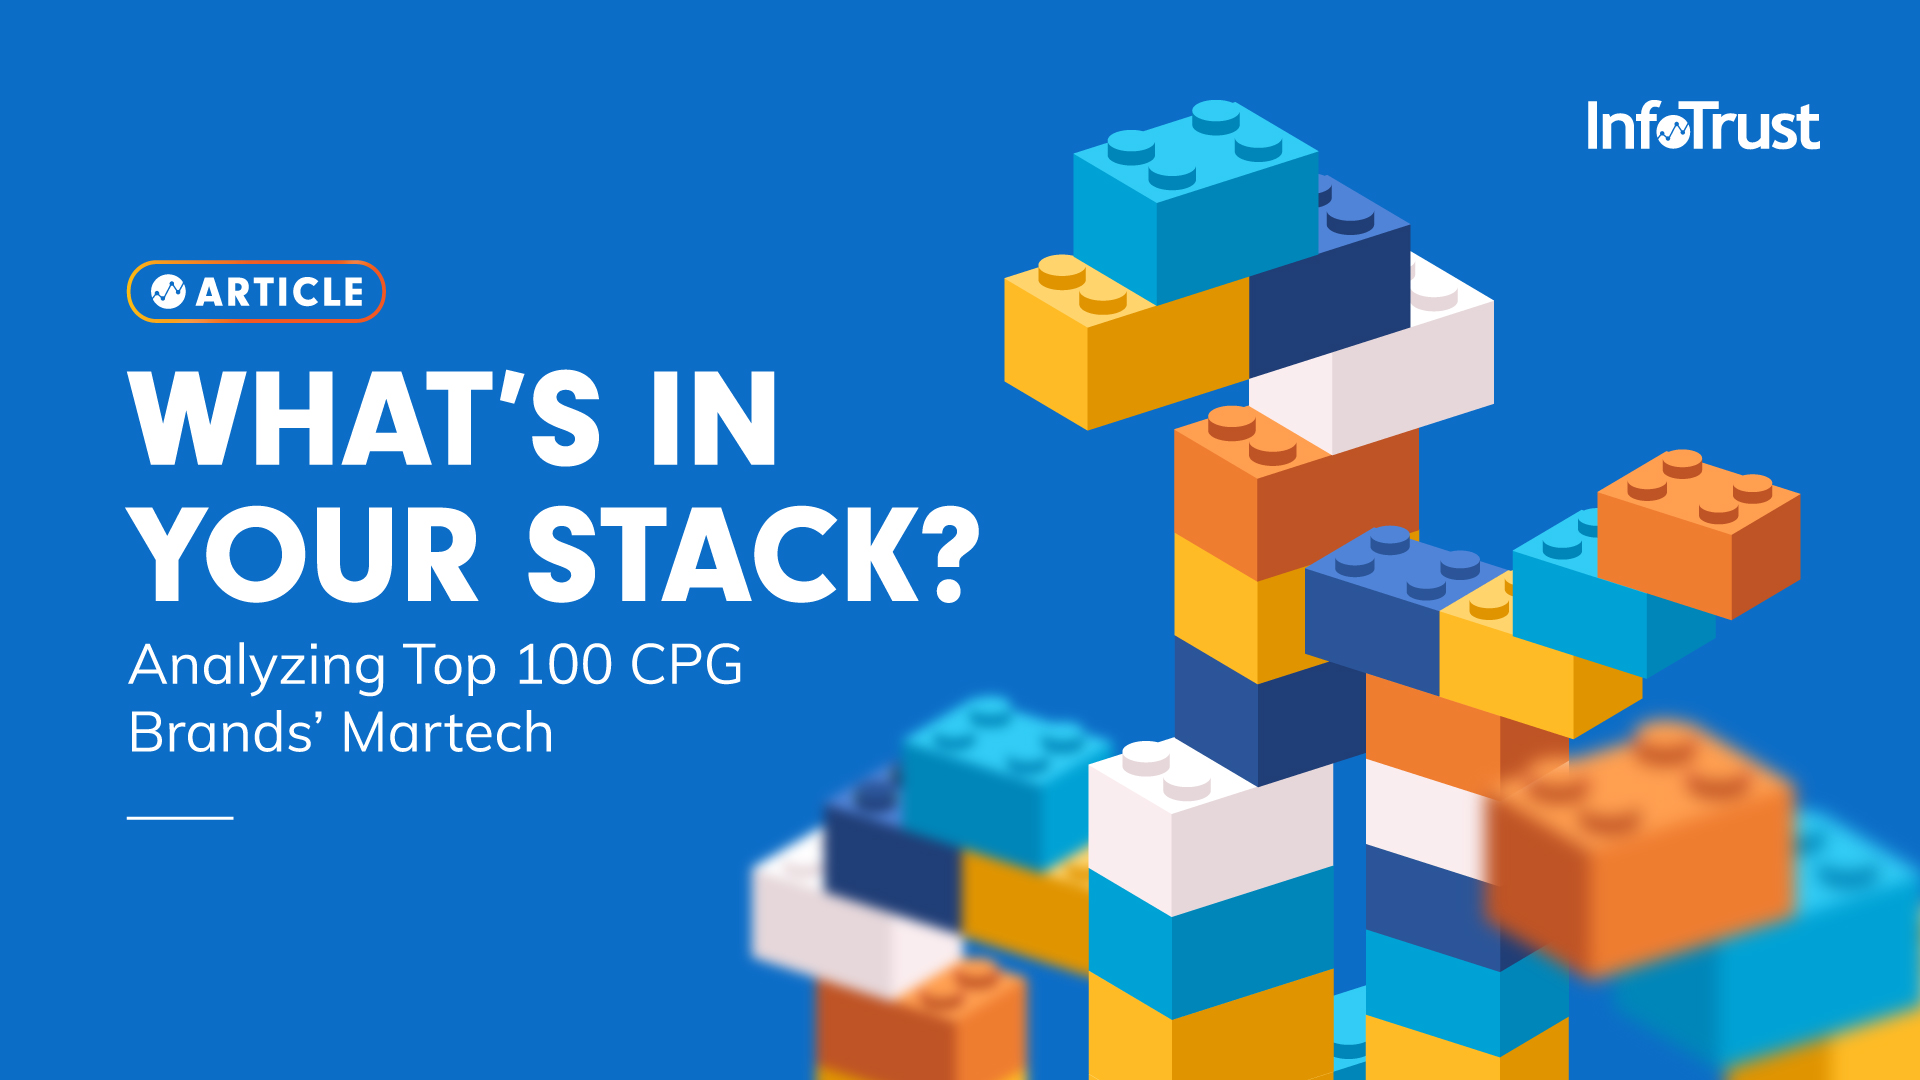 What’s In Your Stack? Analyzing Top 100 CPG Brands’ Martech